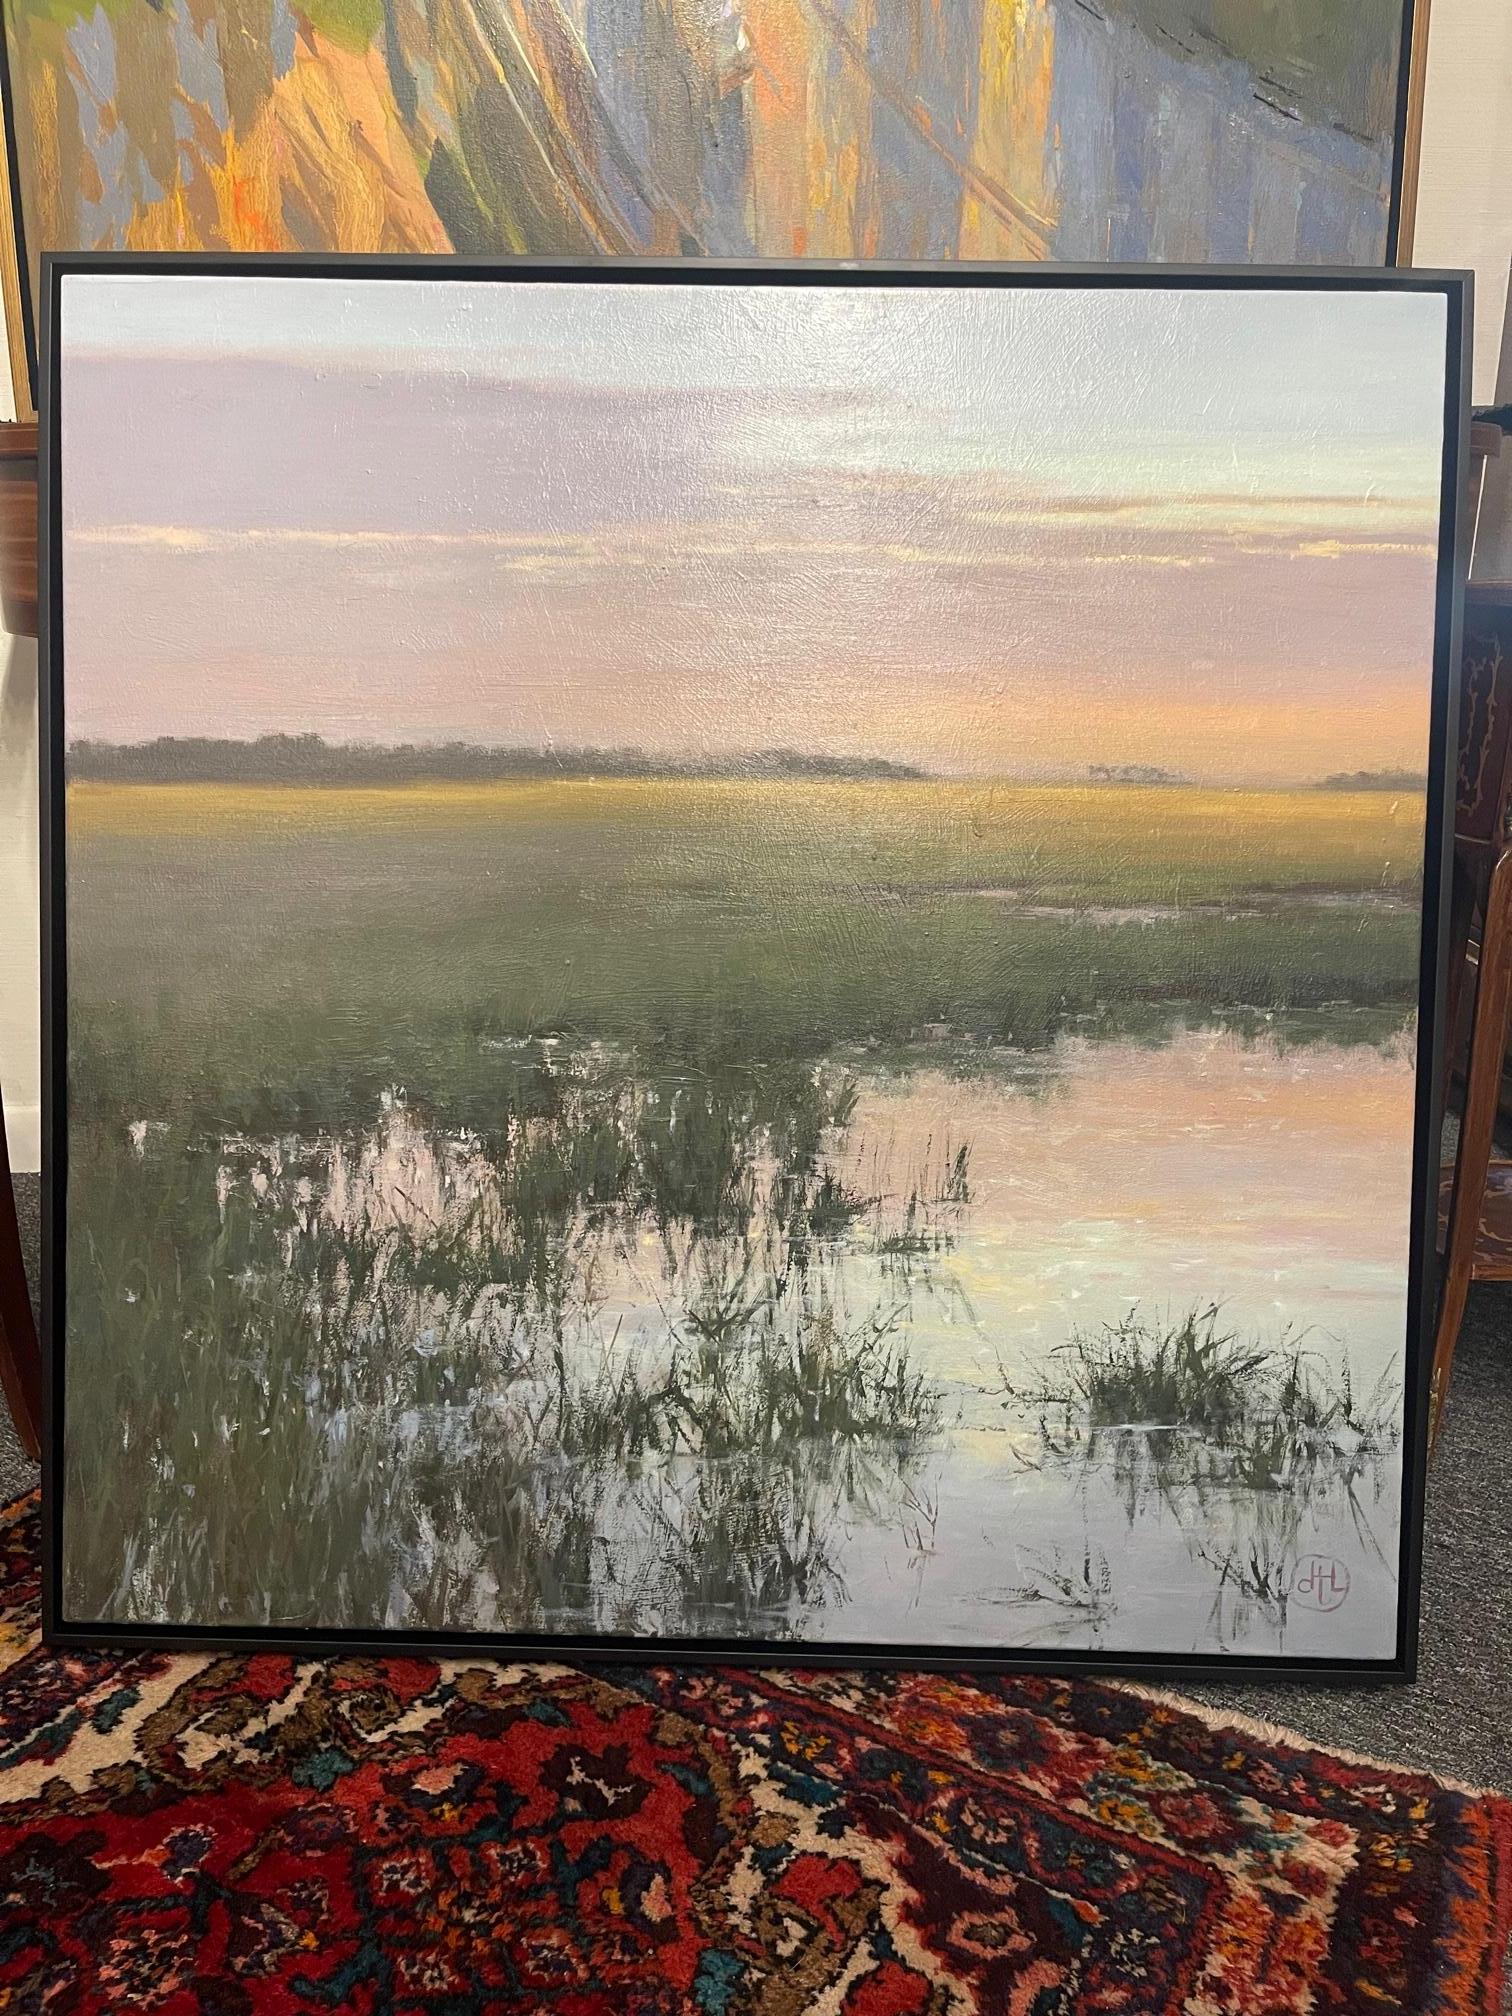 Dottie Turner Leatherwood is a contemporary impressionist painter with a passion for the coastal landscape. Growing up on the Georgia coast, she spent her childhood sketching and writing, her imagination fueled by the landscape that surrounded her.